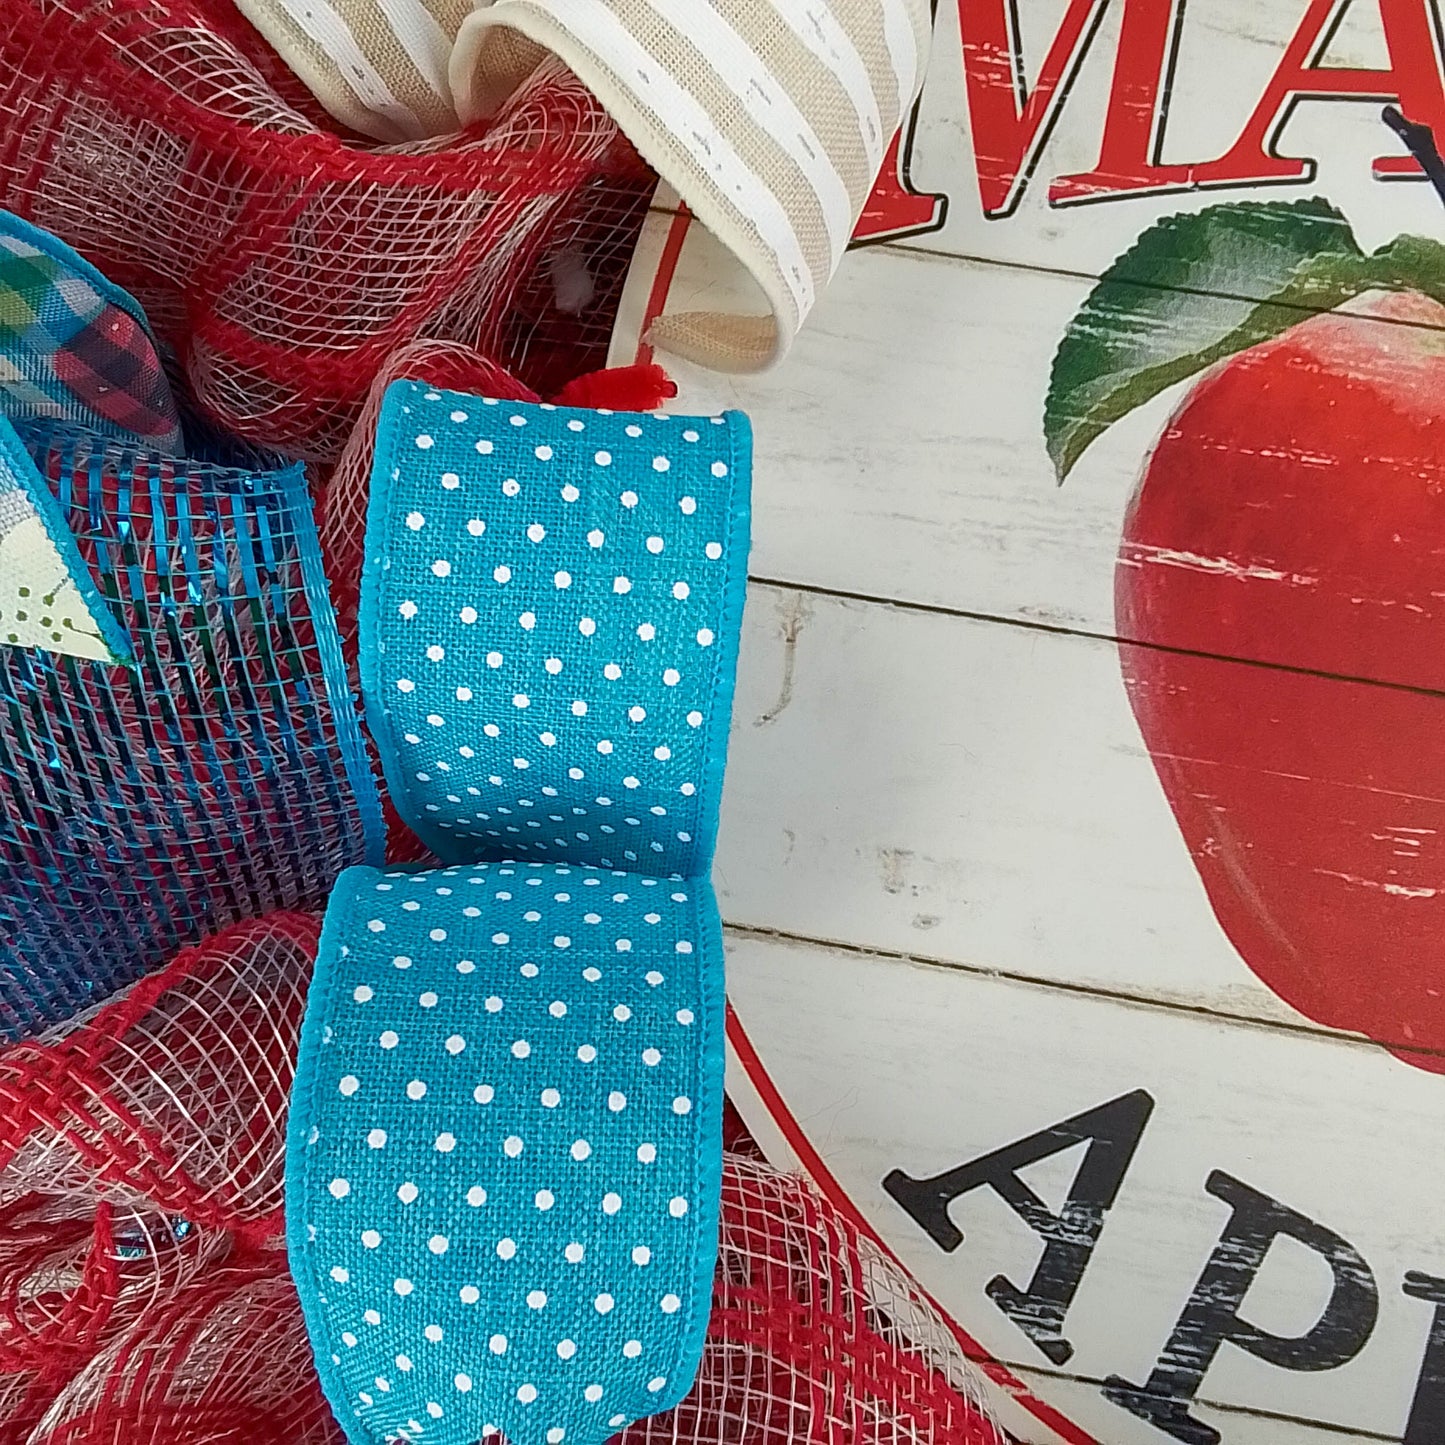 Farmers Market Summer Apple Wreath - Vibrant Red, Turquoise, and White Colors